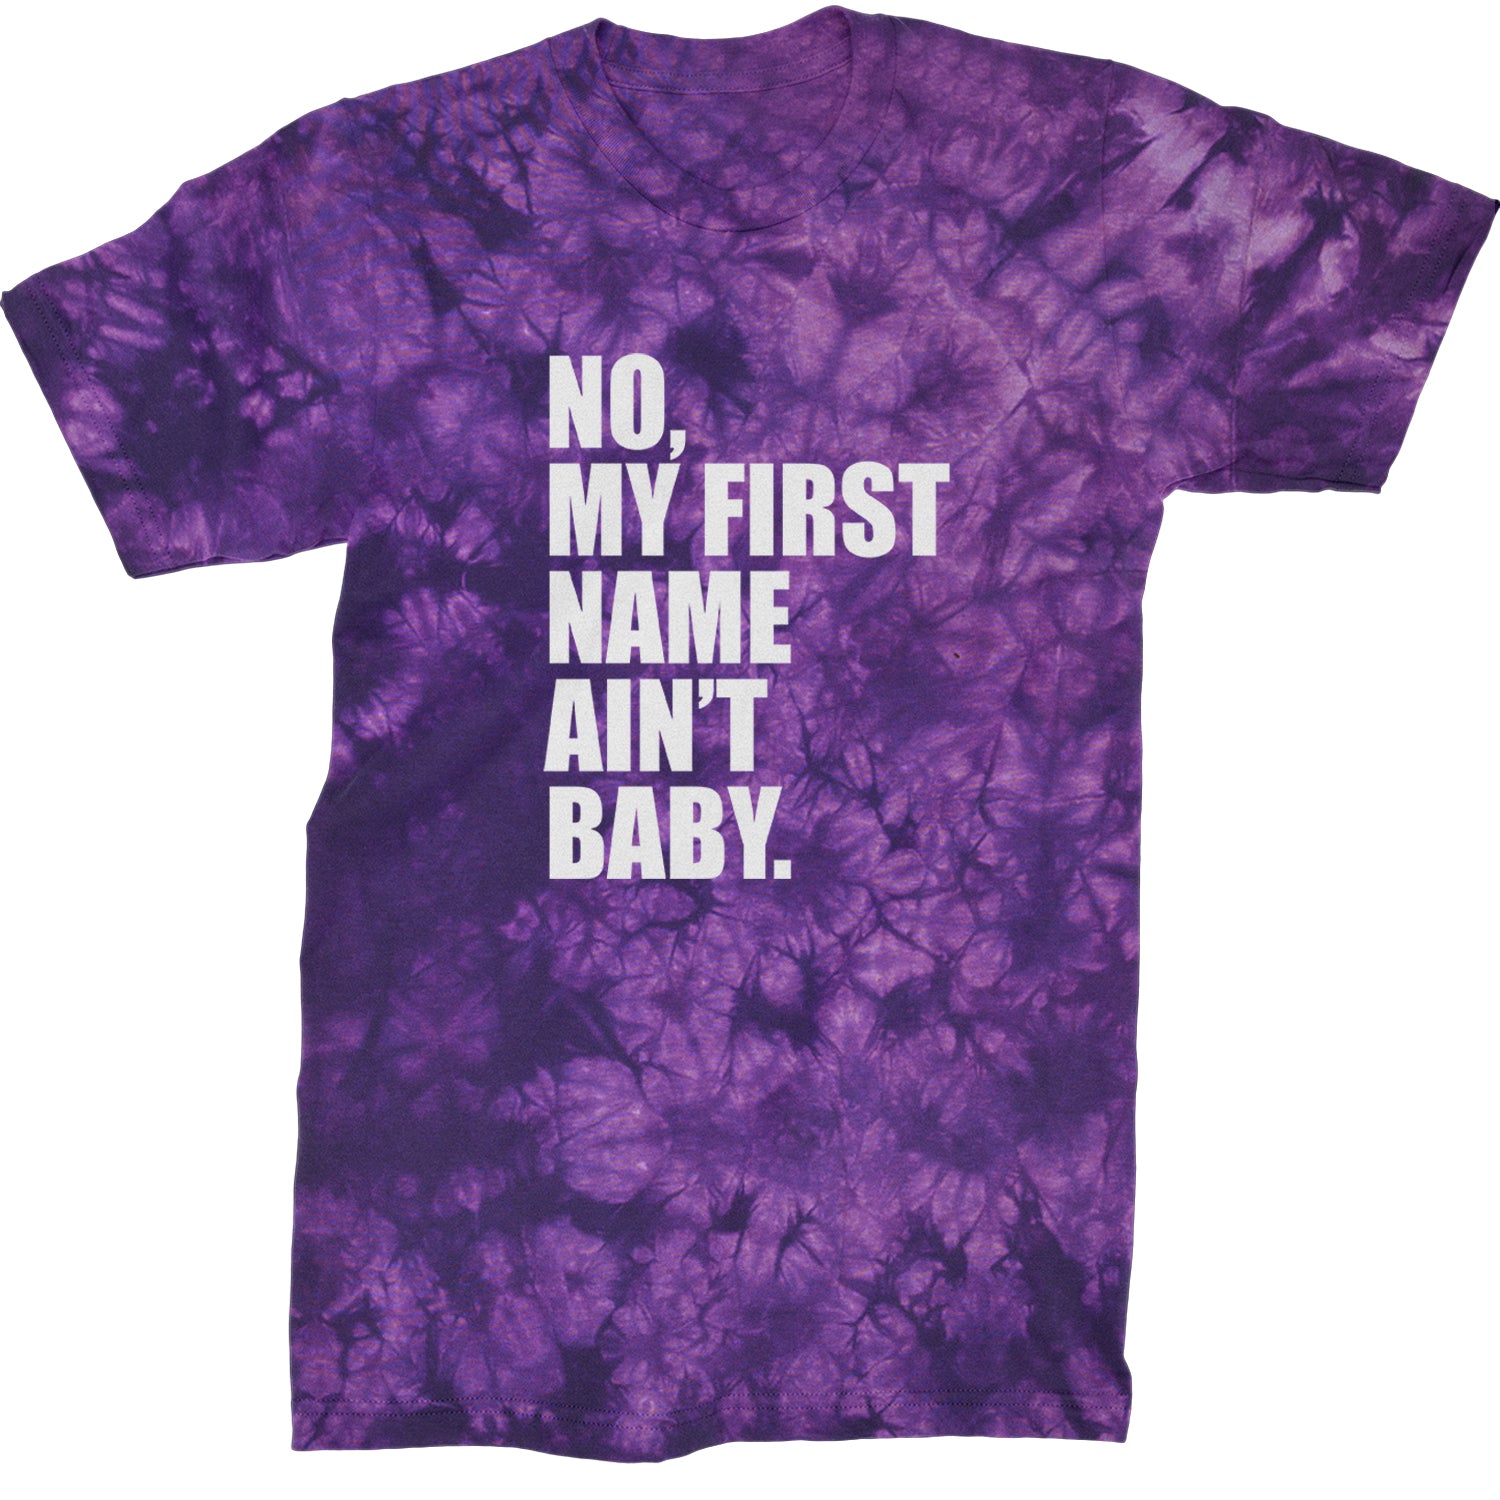 No My First Name Ain't Baby Together Again Mens T-shirt Tie-Dye Crystal Purple